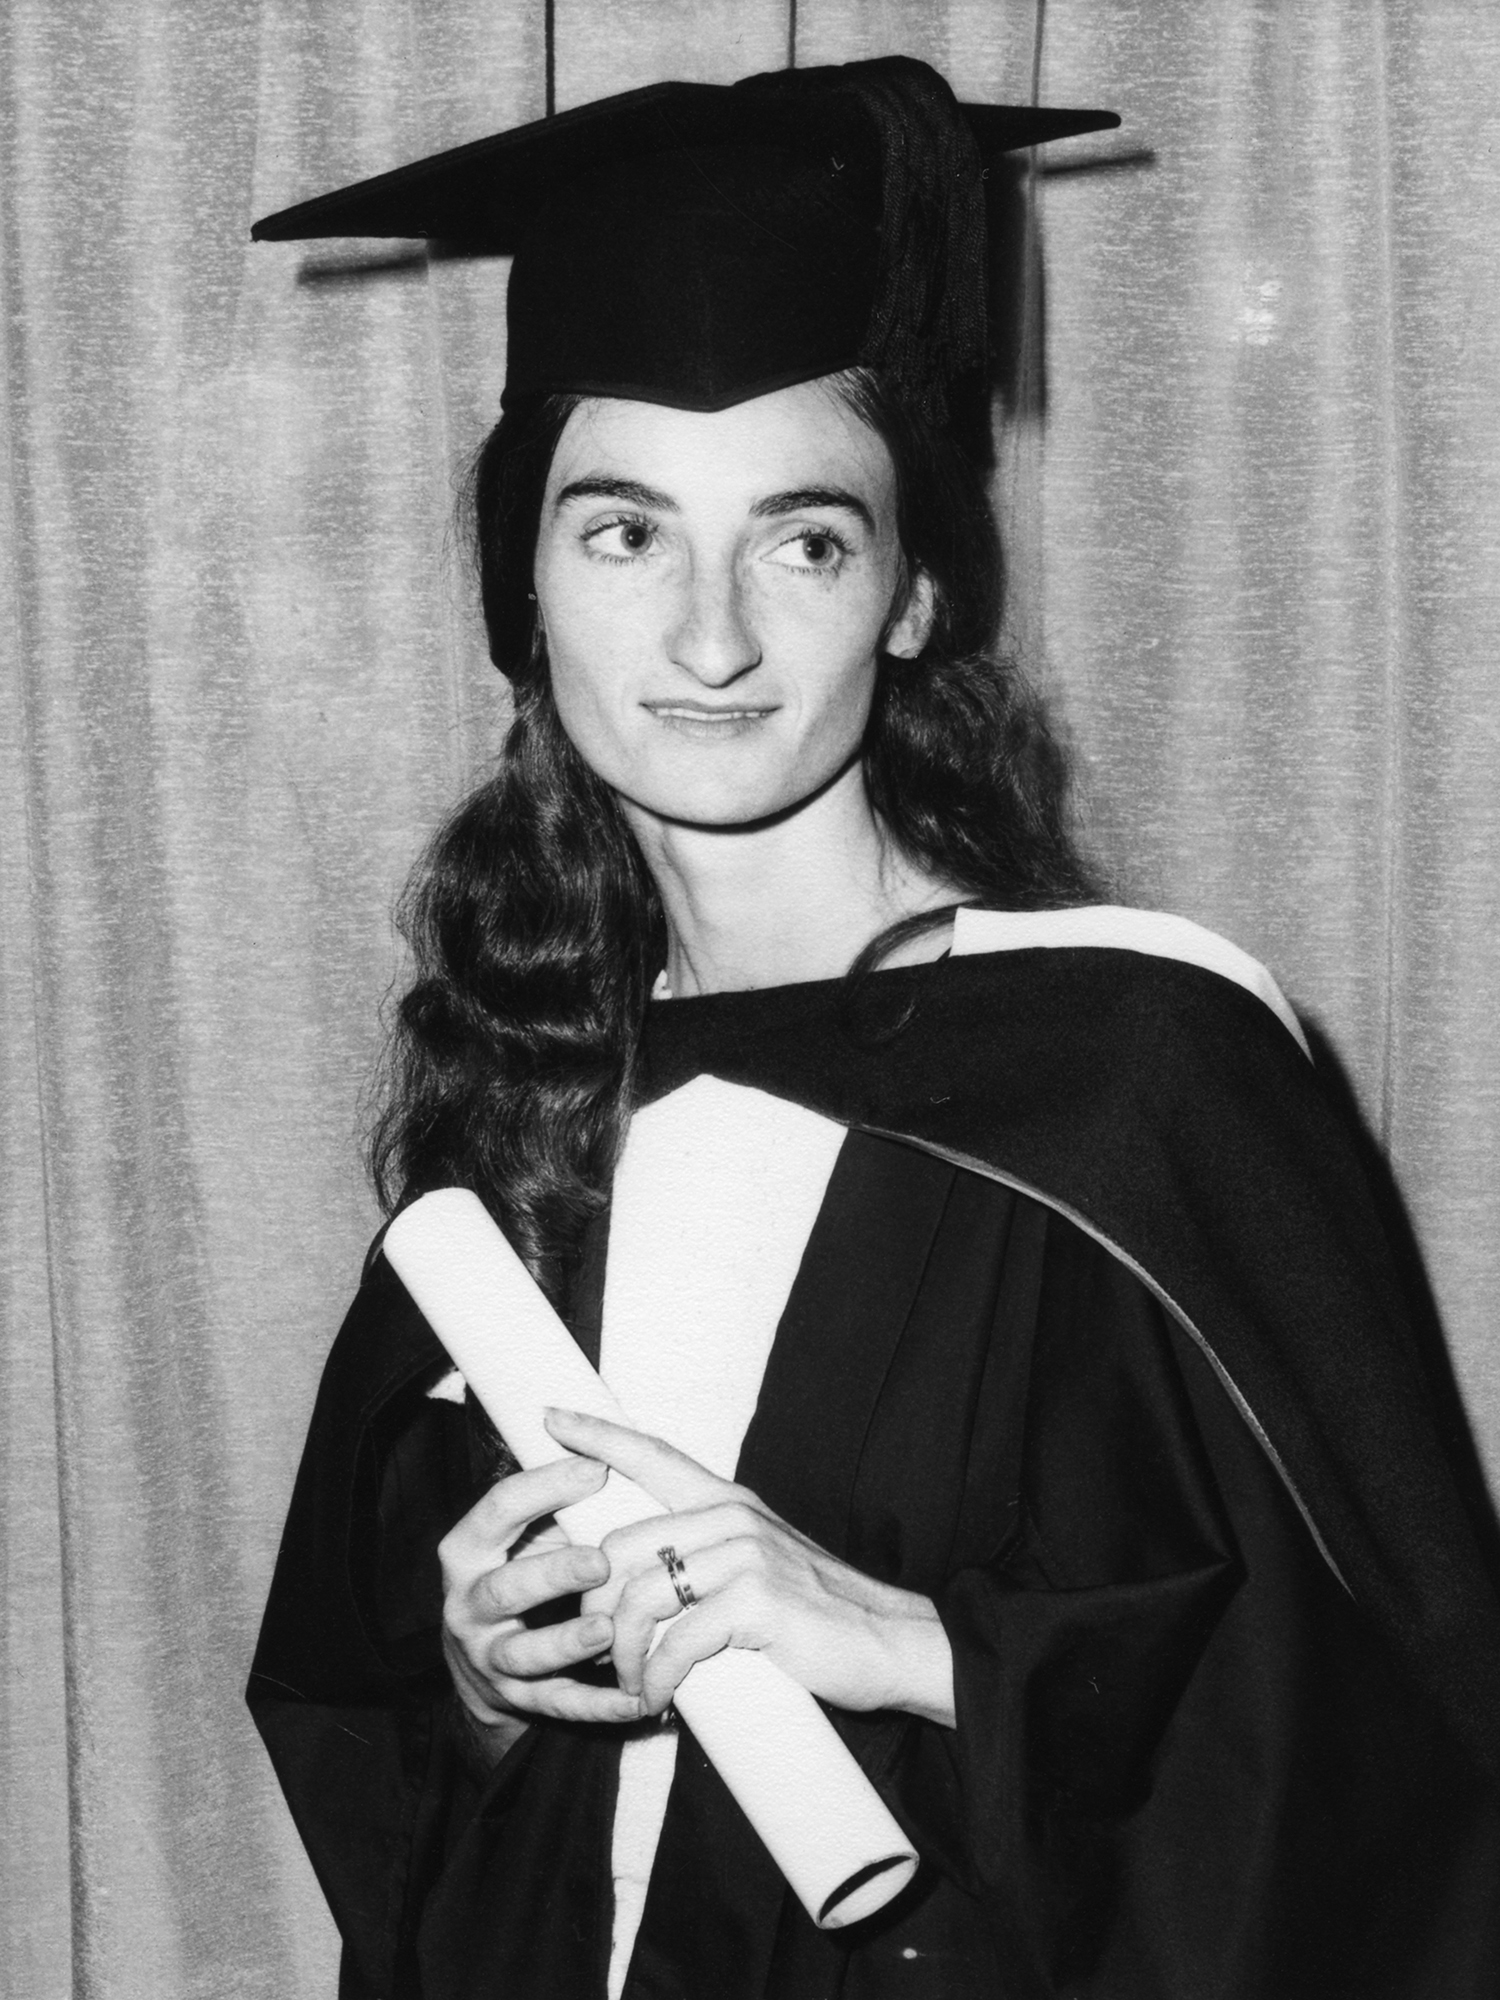 Photograph of an individual with long hair in a graduation cap and gown, holding a rolled up piece of paper in their hand